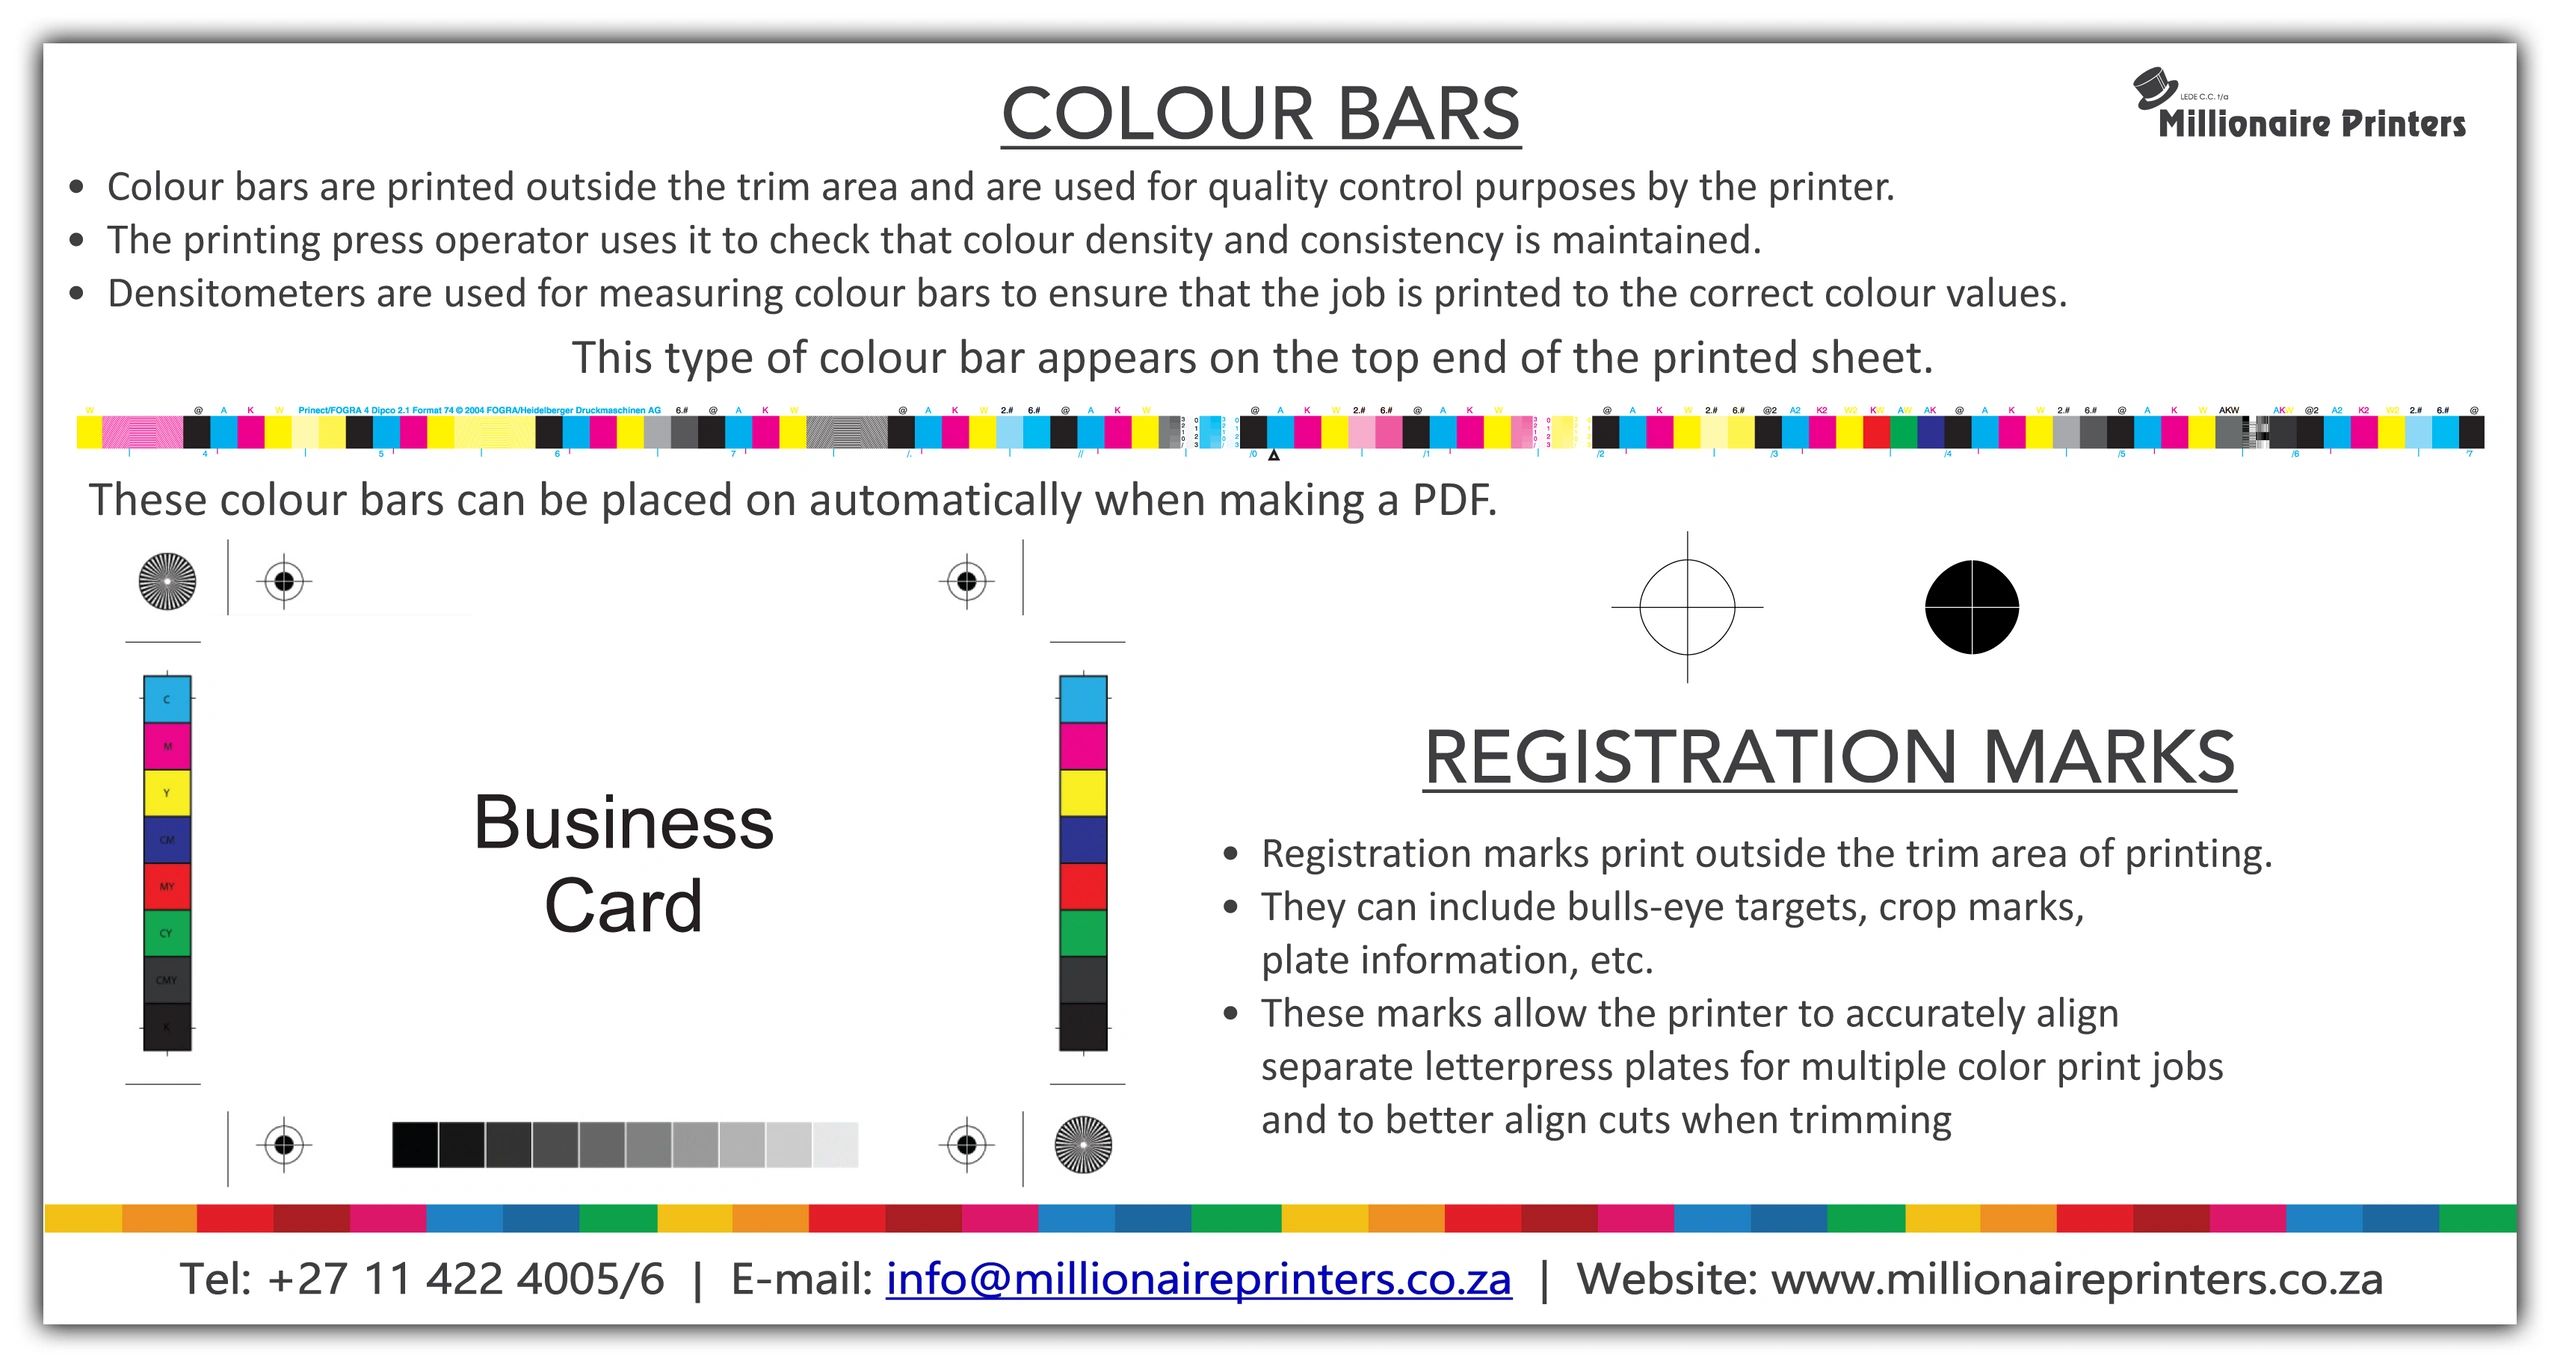 Colour bars are important when printing so that the colour can be controlled.